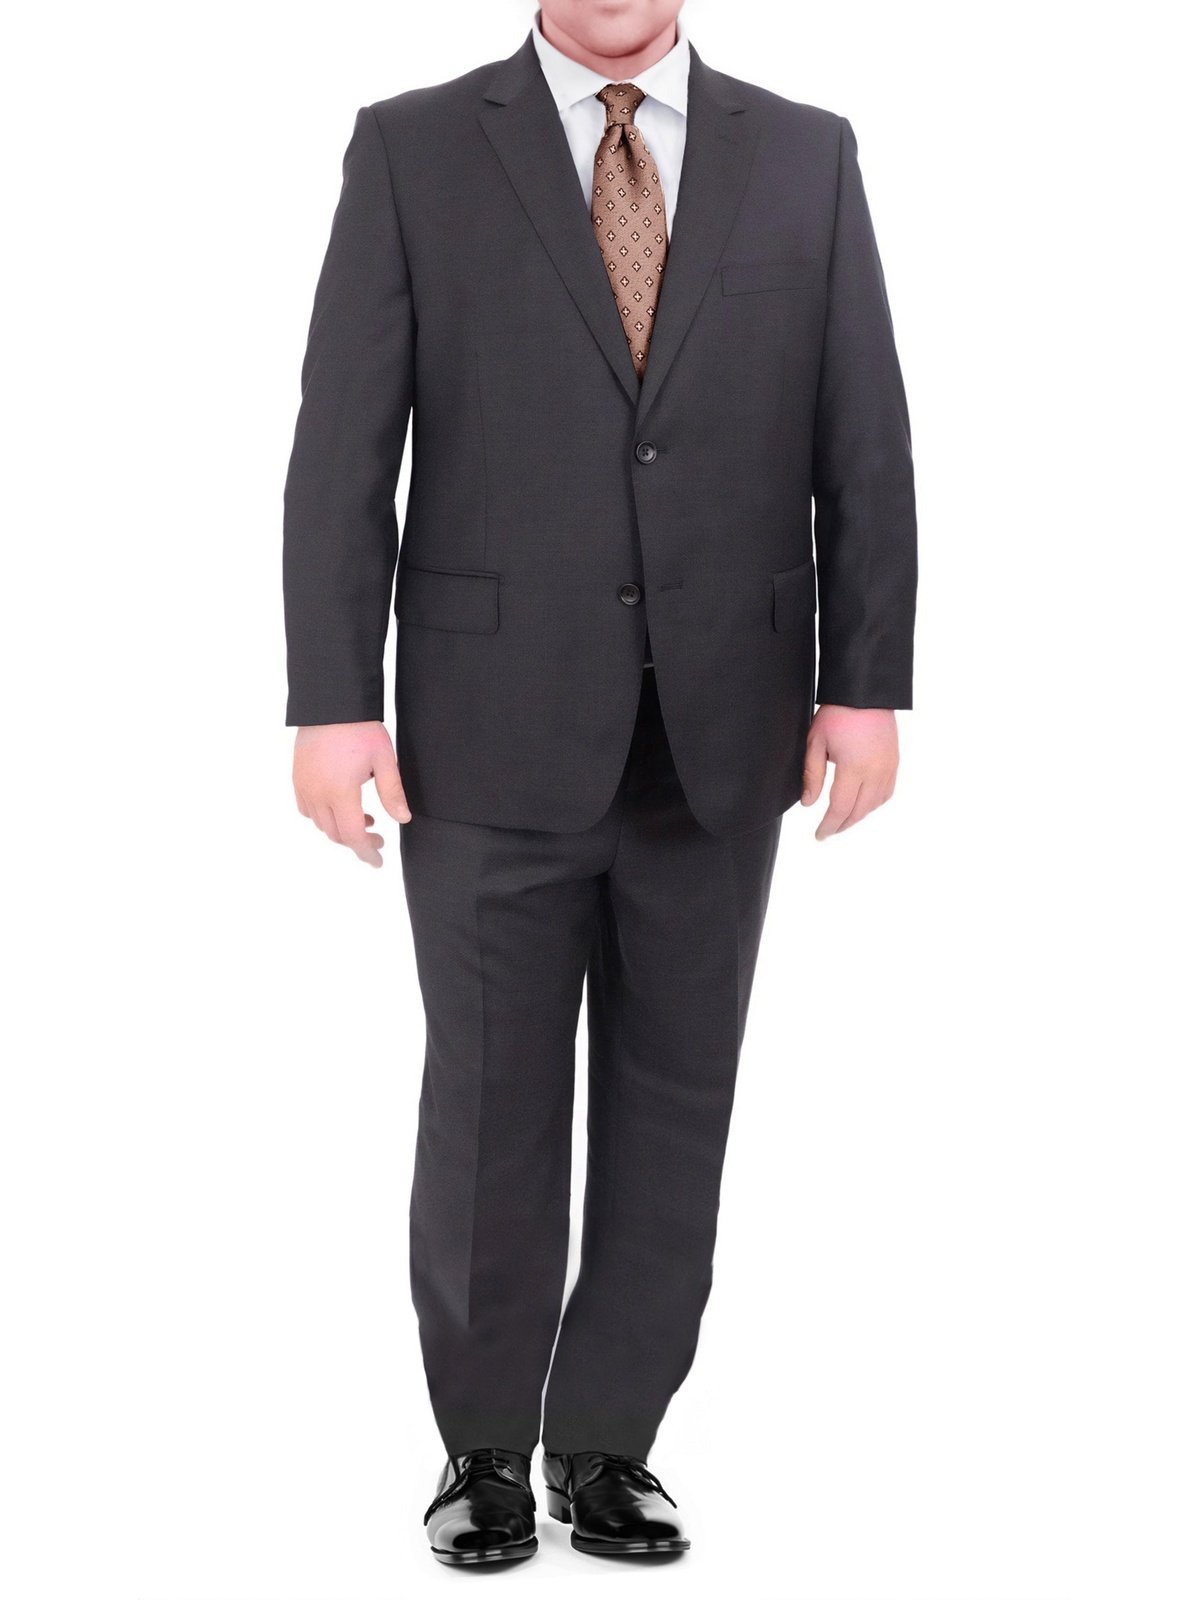 Executive Collection Traditional Fit Blazer CLEARANCE - All Clearance